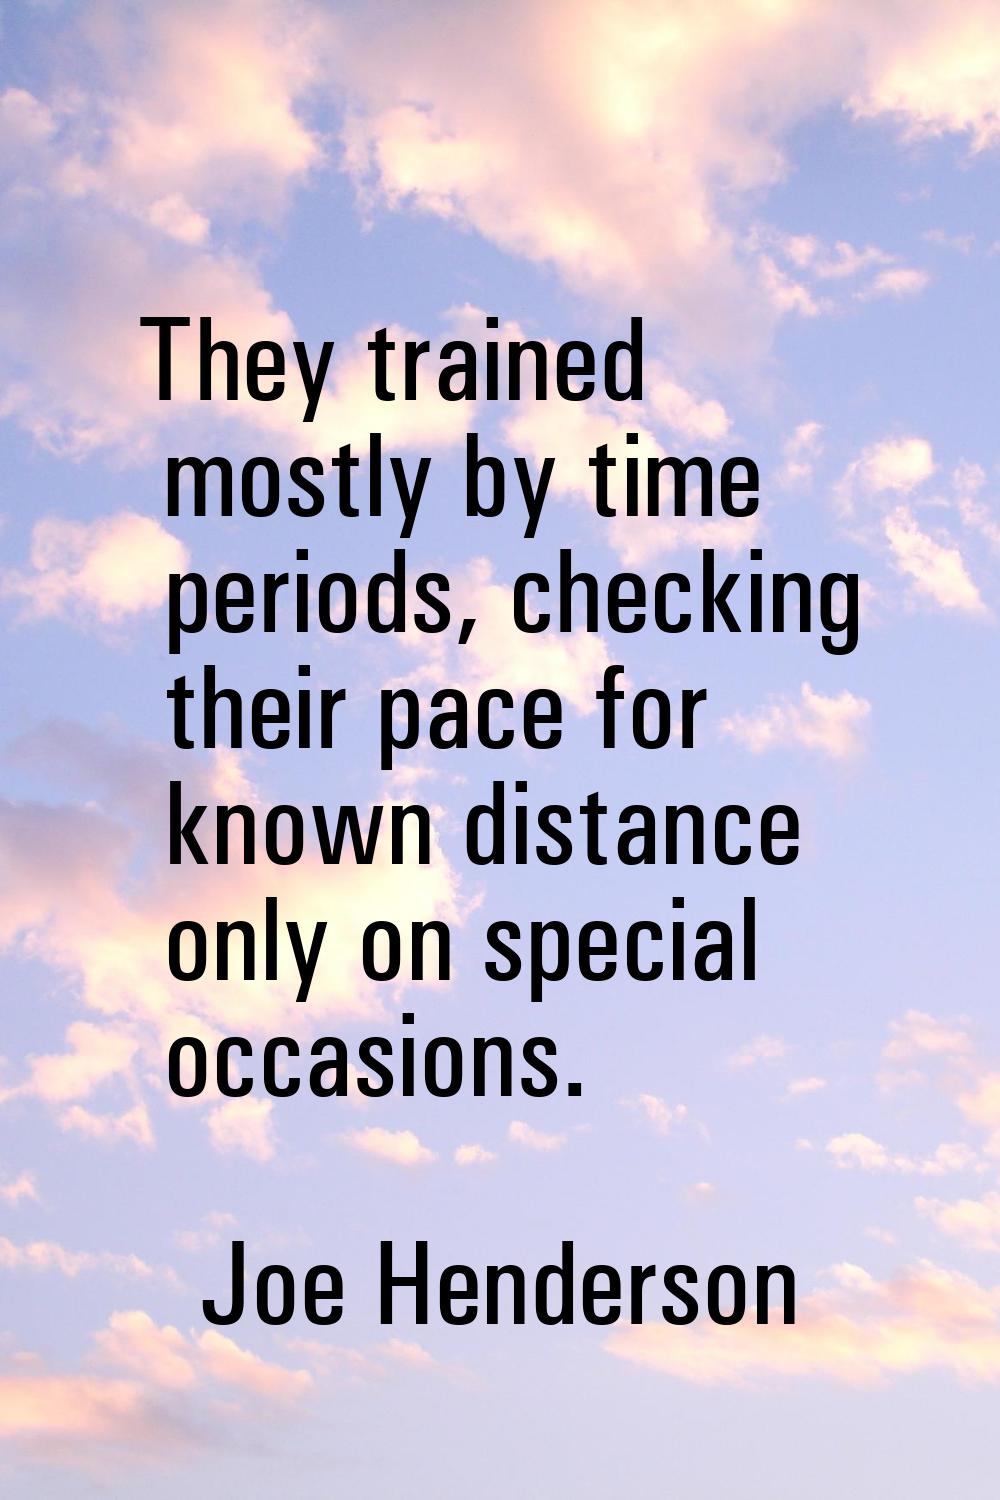 They trained mostly by time periods, checking their pace for known distance only on special occasio